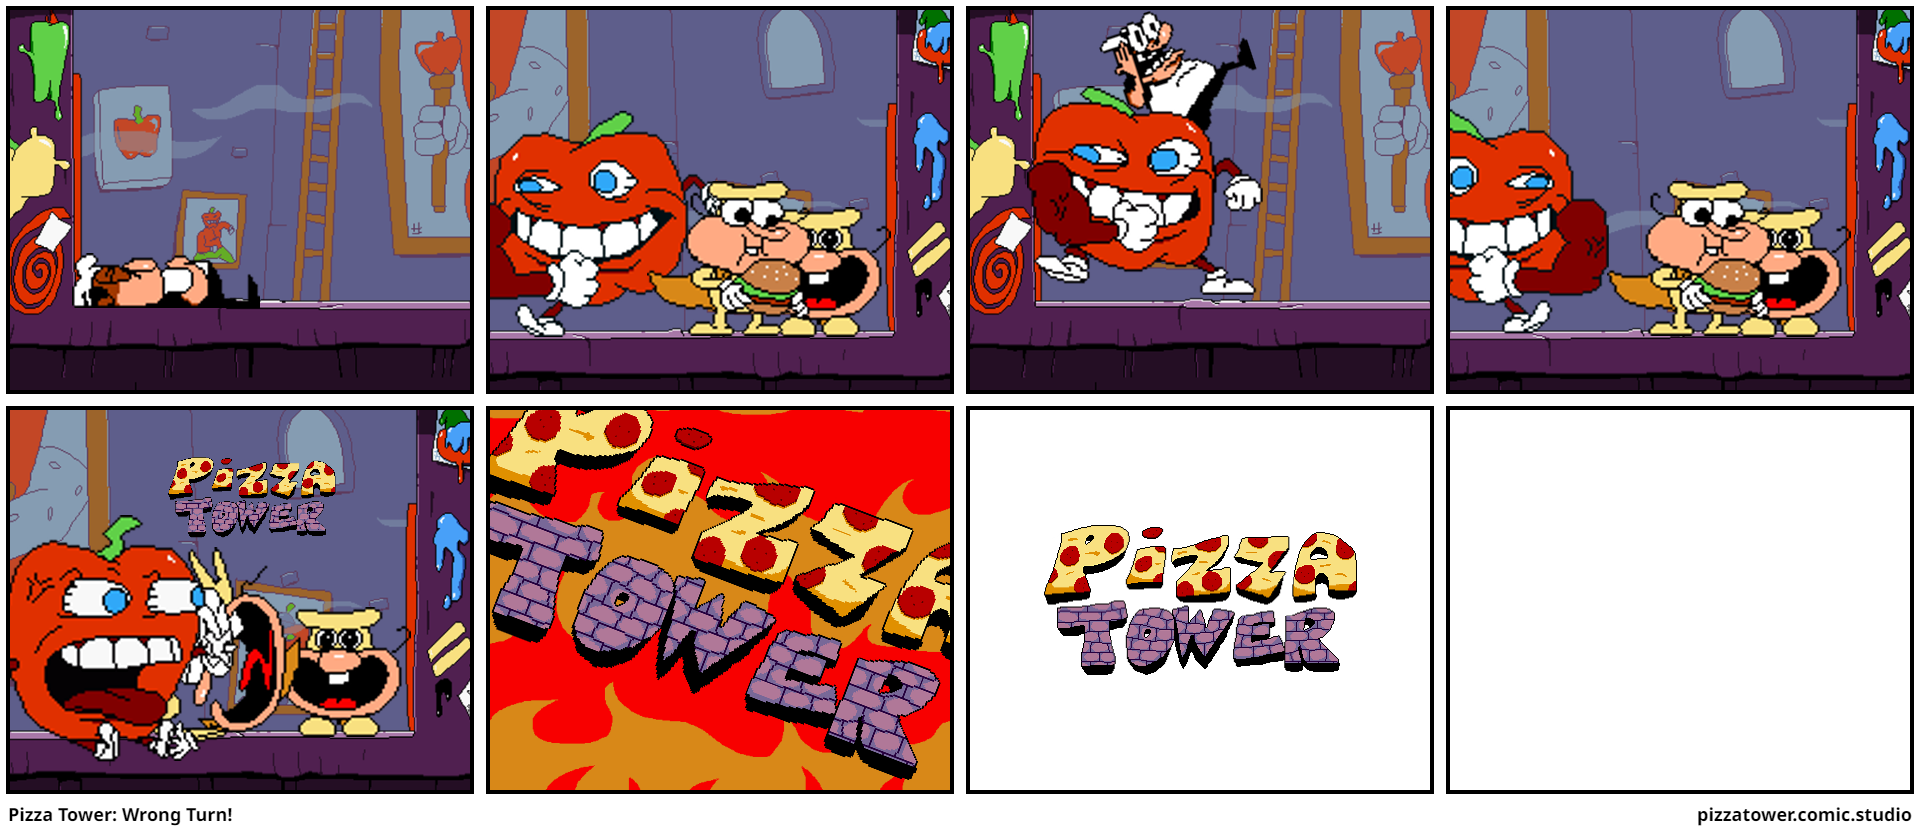 switch to pizza tower! - Comic Studio